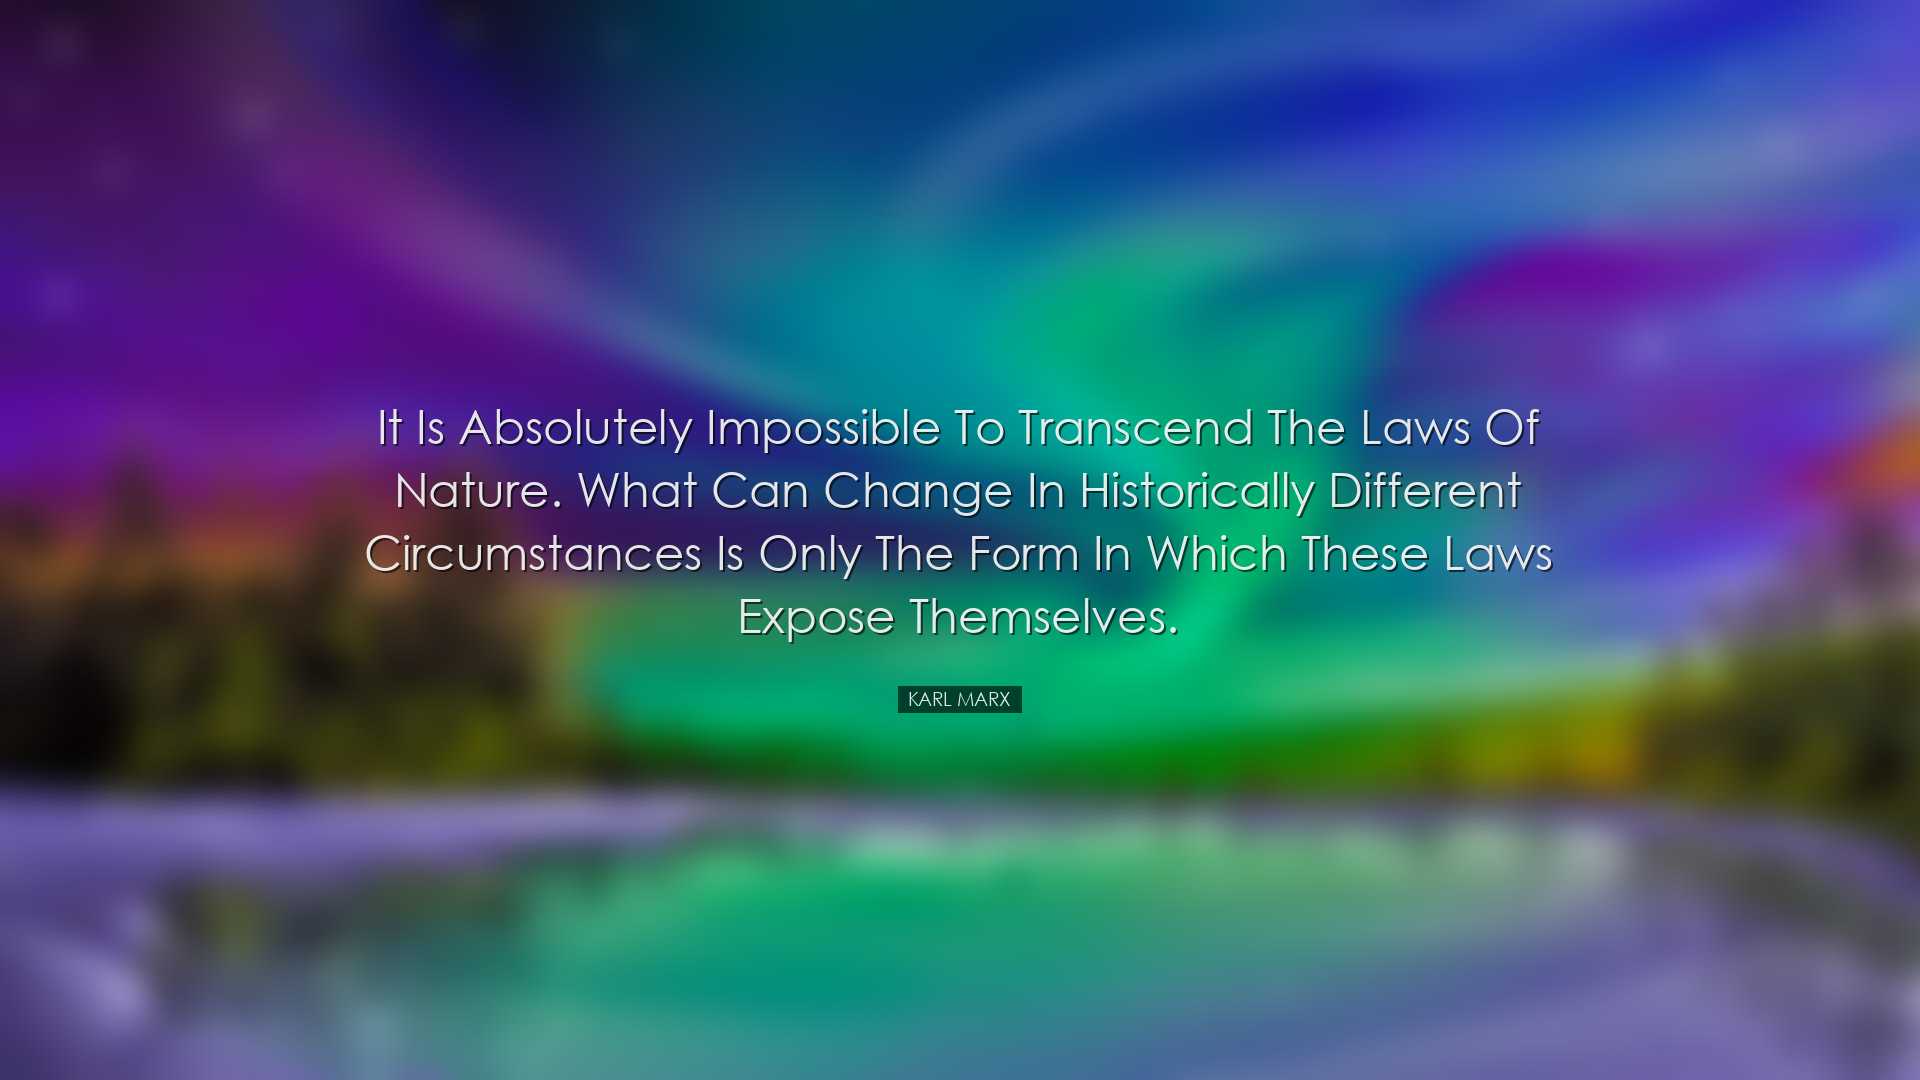 It is absolutely impossible to transcend the laws of nature. What